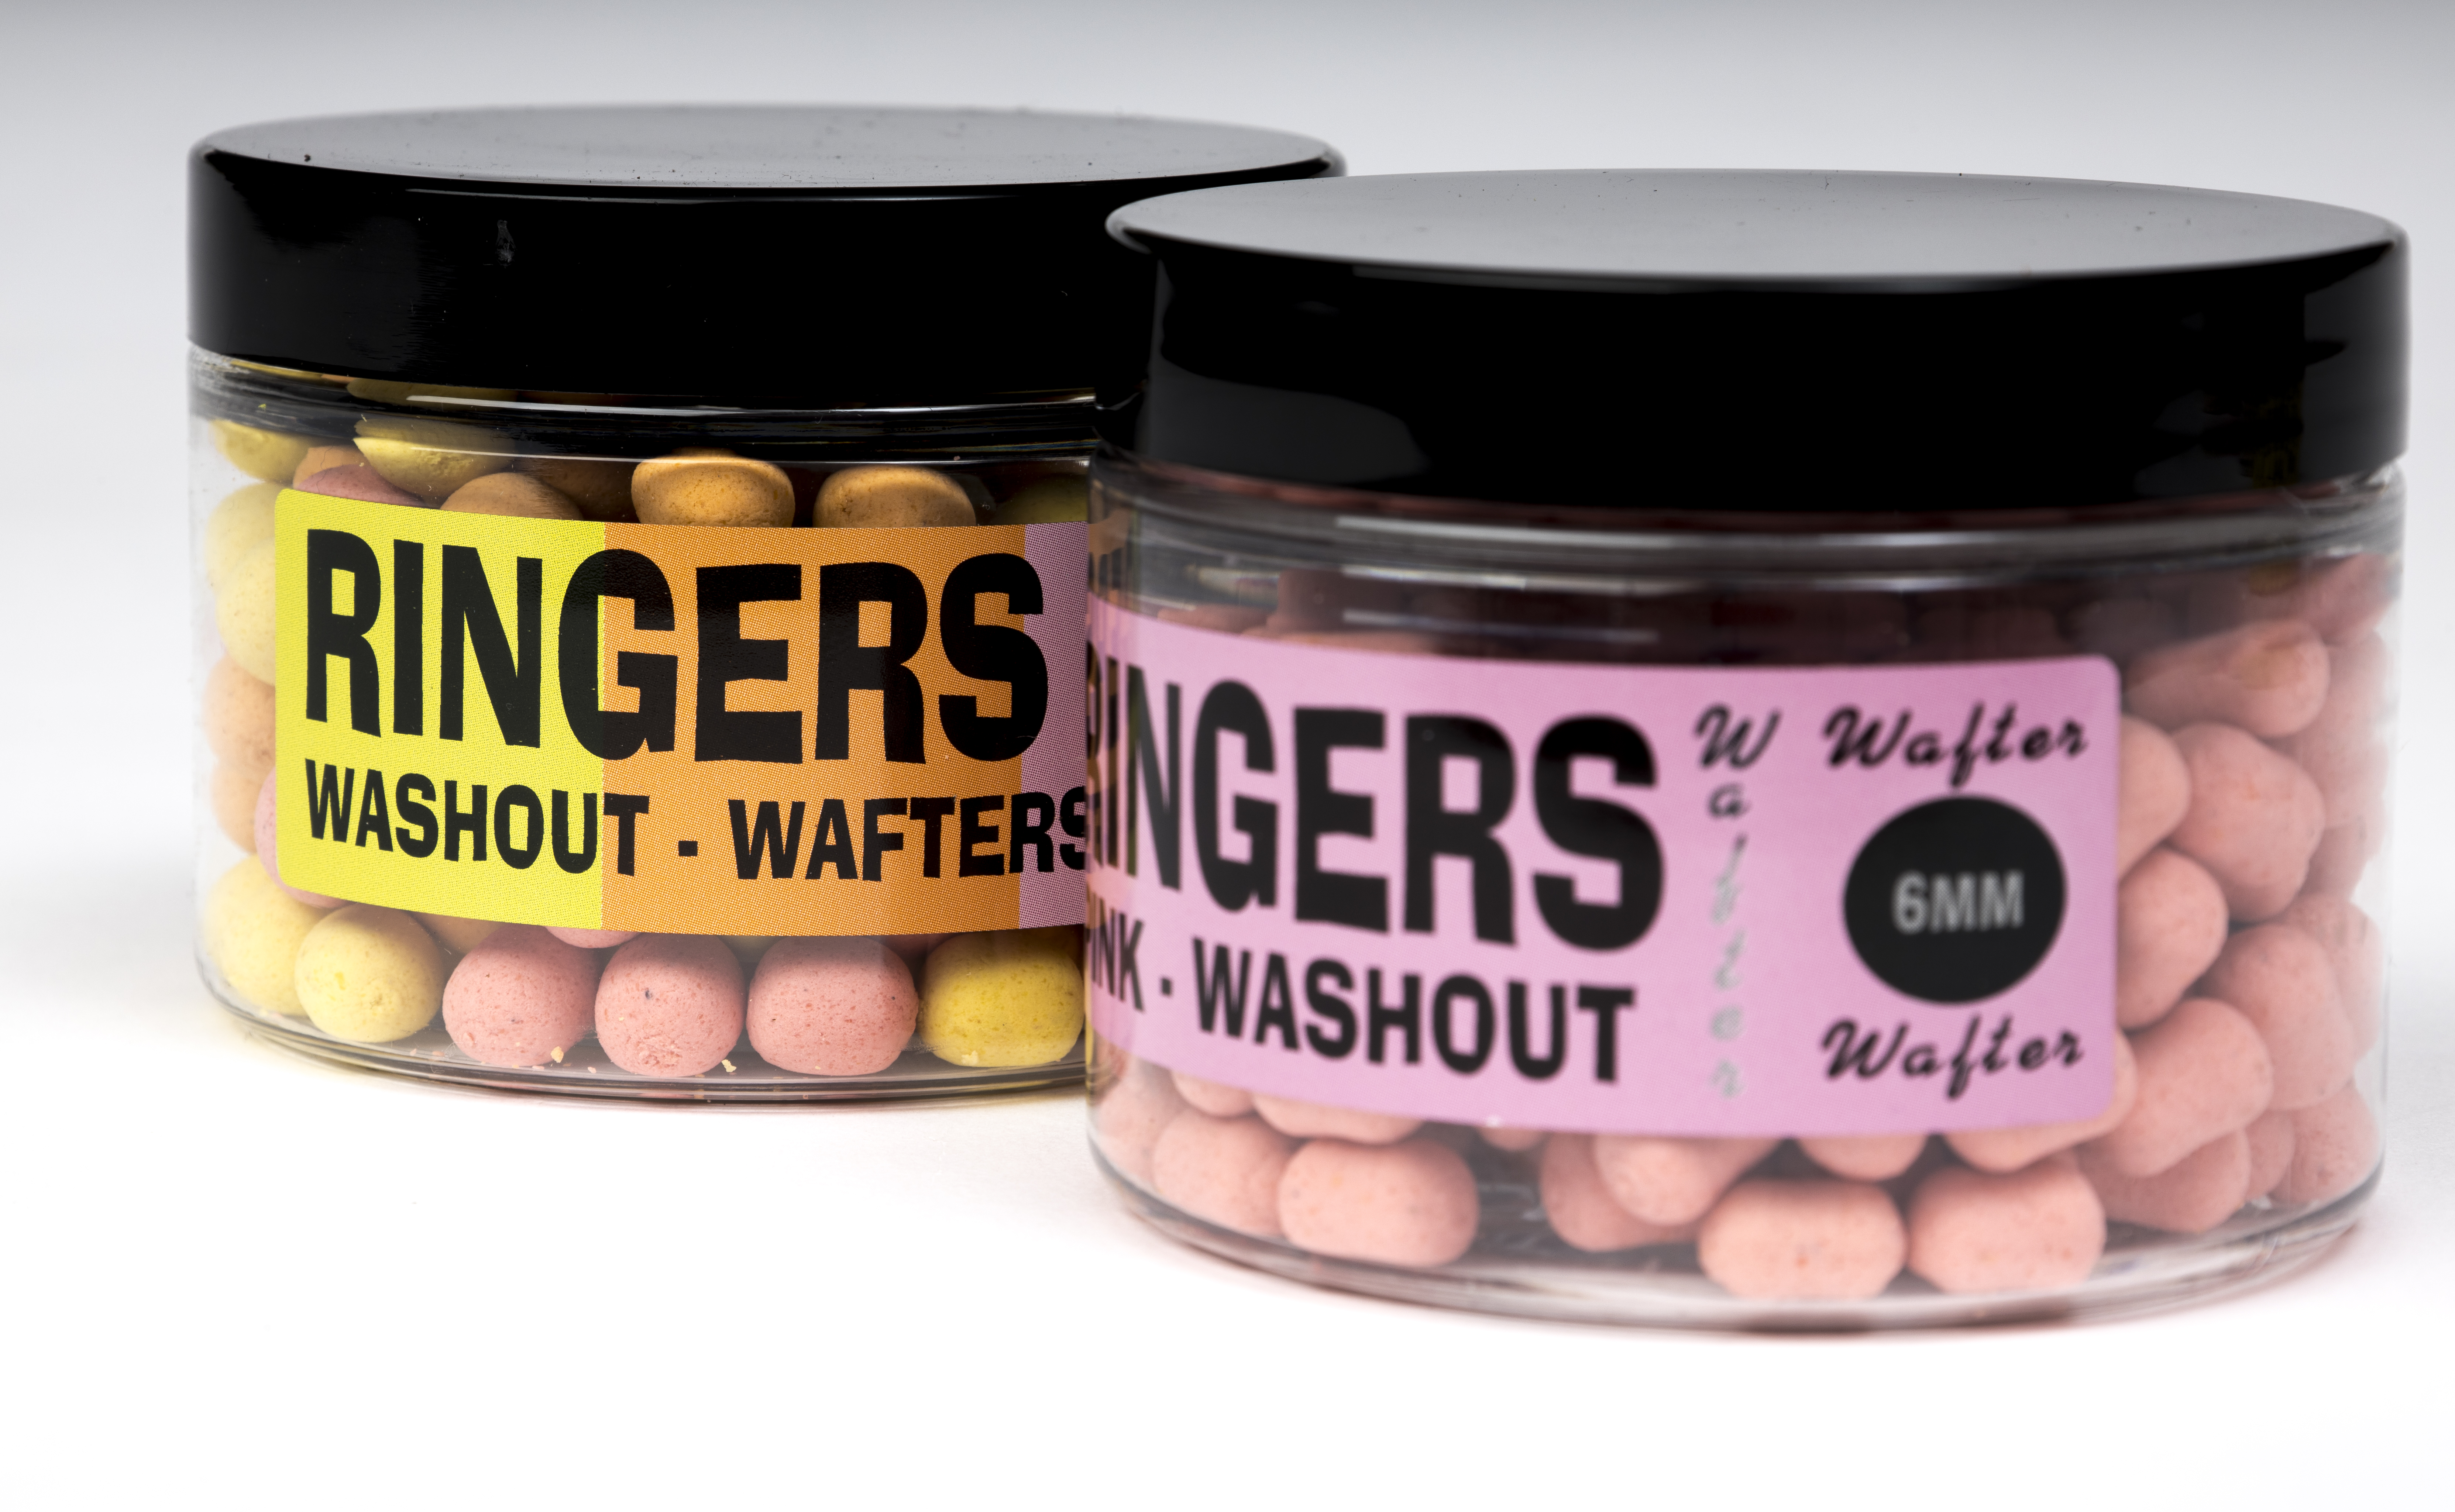 Ringers - Washout Wafters 6mm mix 70g